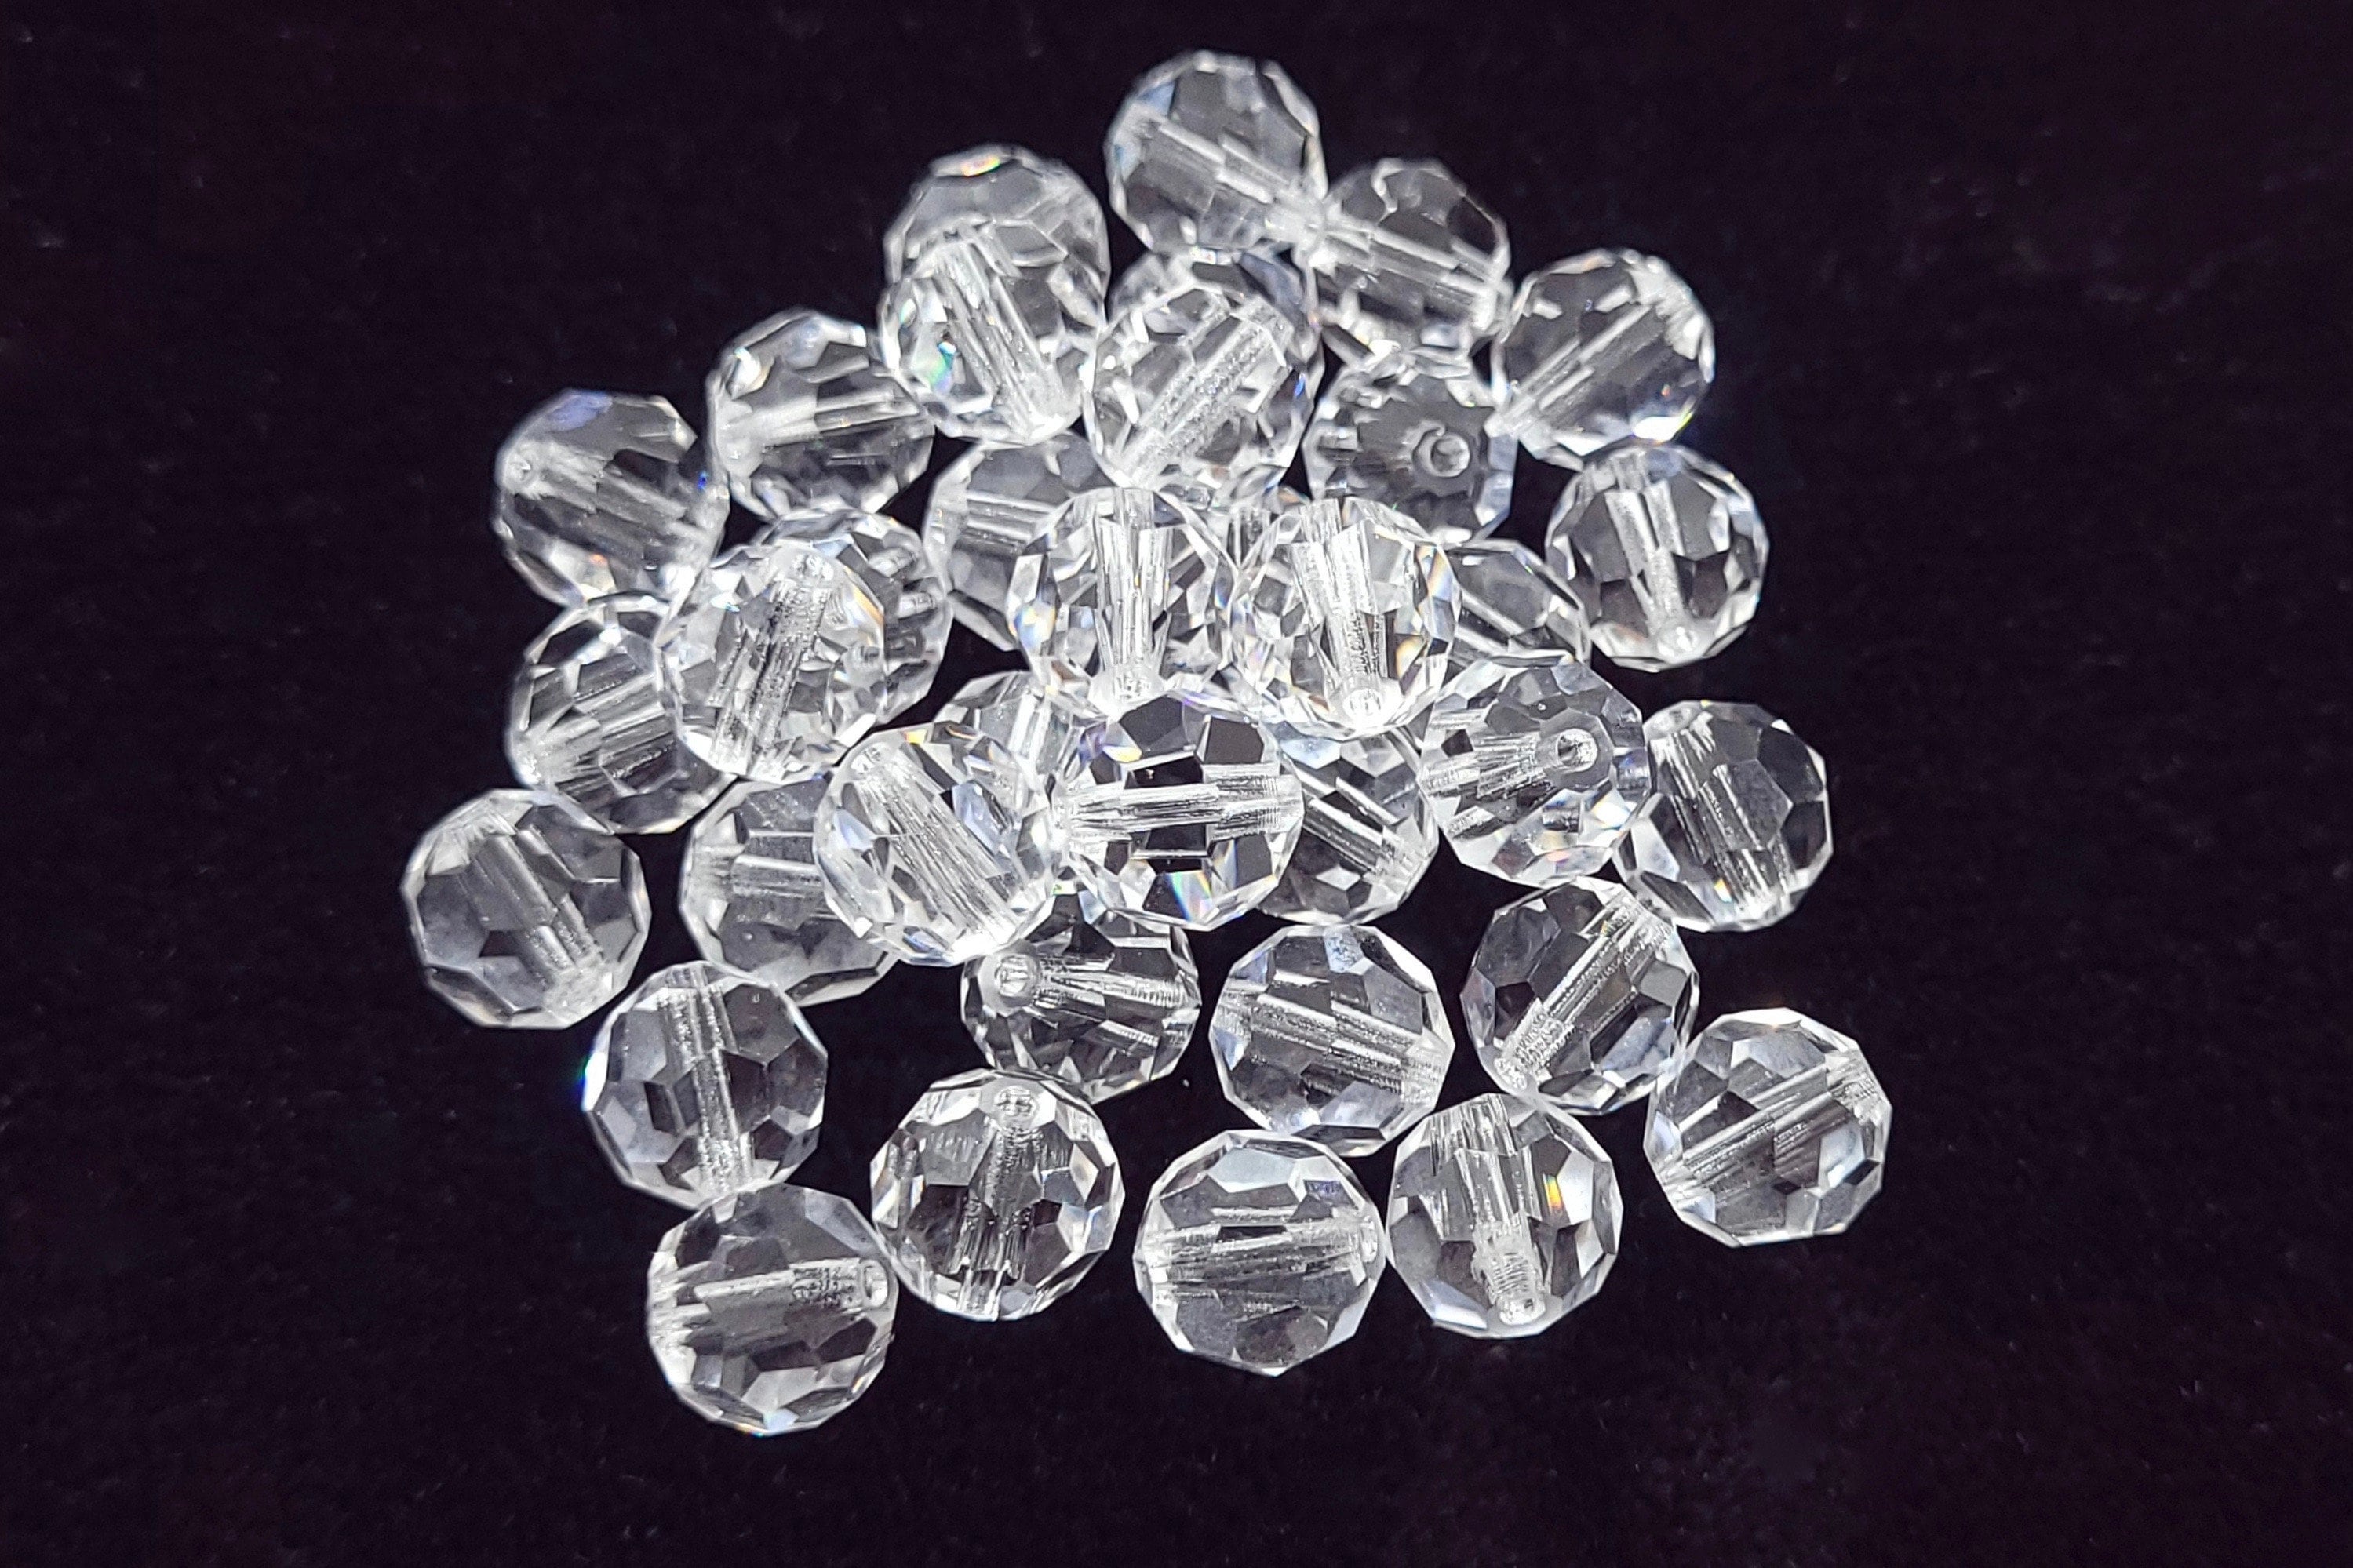 10 Beads - 8mm Faceted Clear White Glass Round Crystal Beads, Clear Glass  Crystal, Clear Round Beads, Clear White Crystal Beads